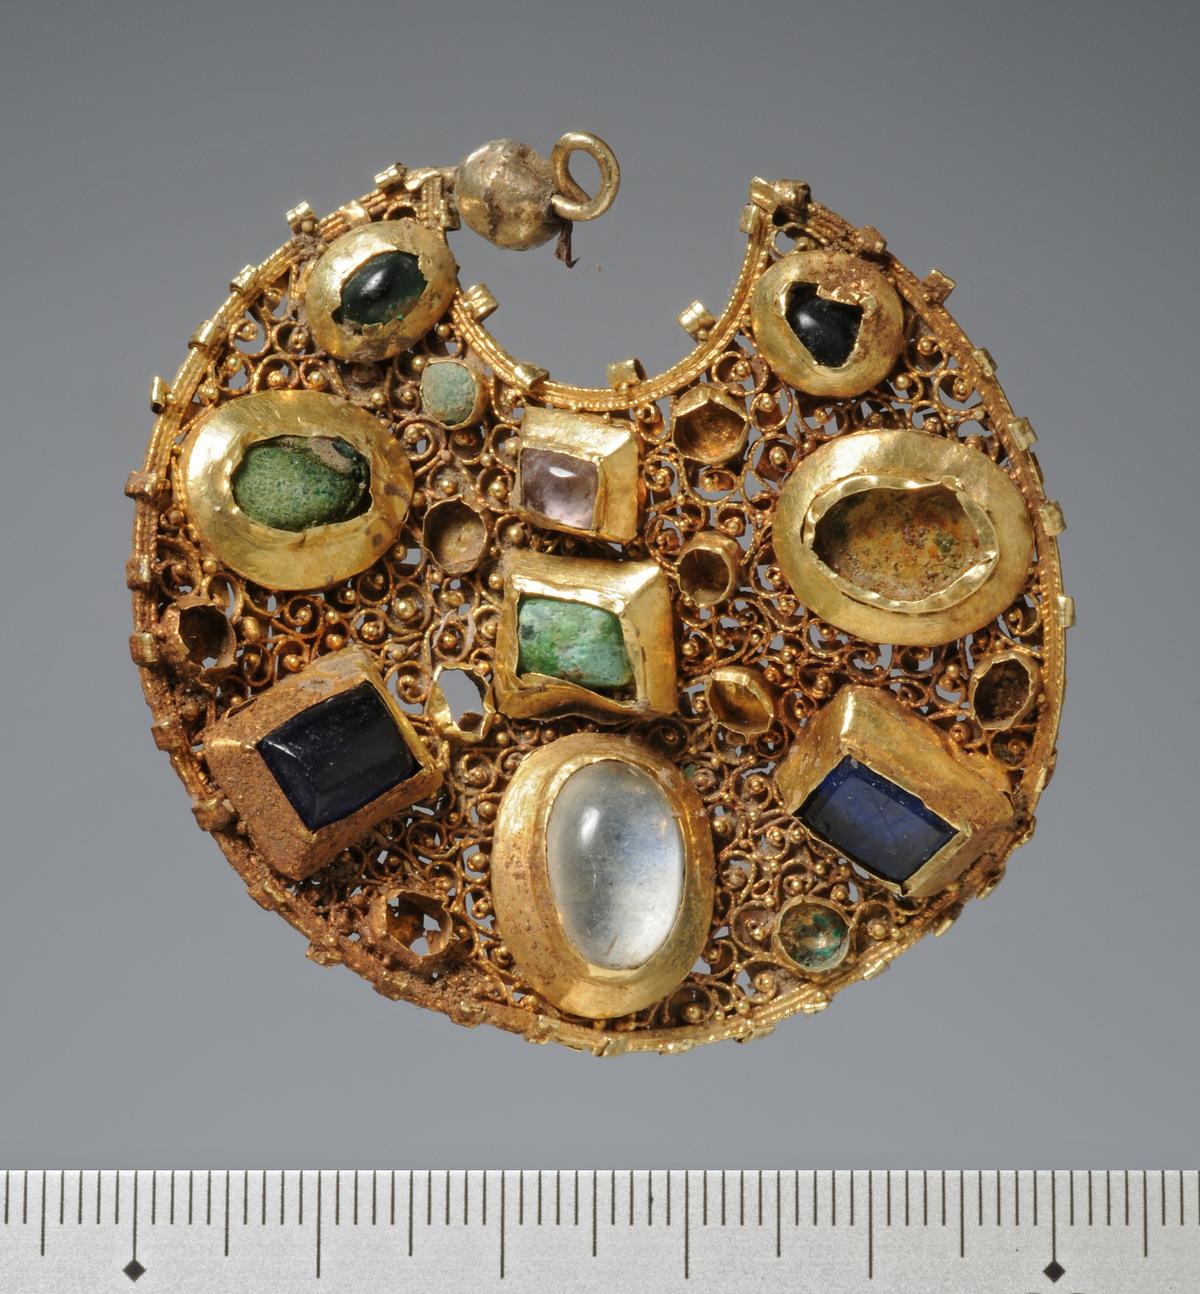 The front of one of the gold earrings. (Courtesy of <a href="http://www.schleswig-holstein.de/">ALSH</a>)